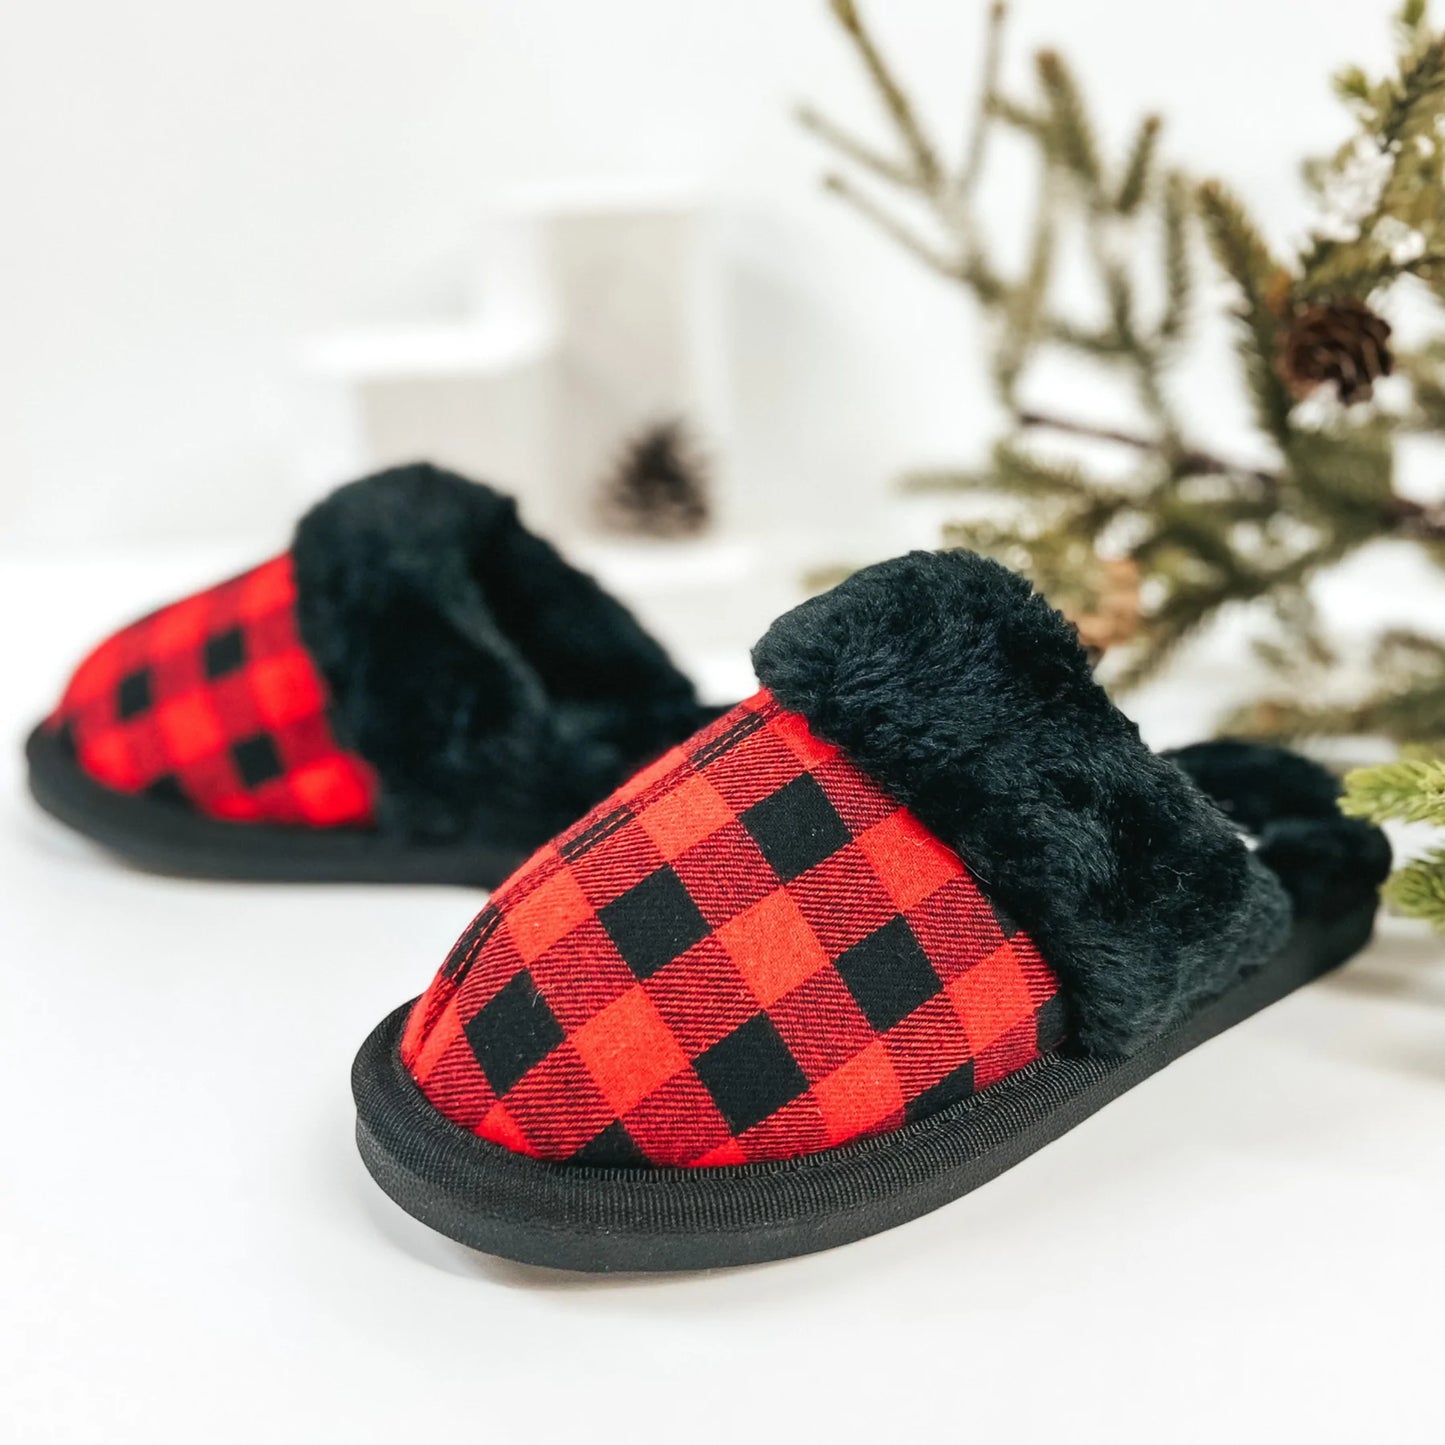 Snooze Slippers - Red Plaid